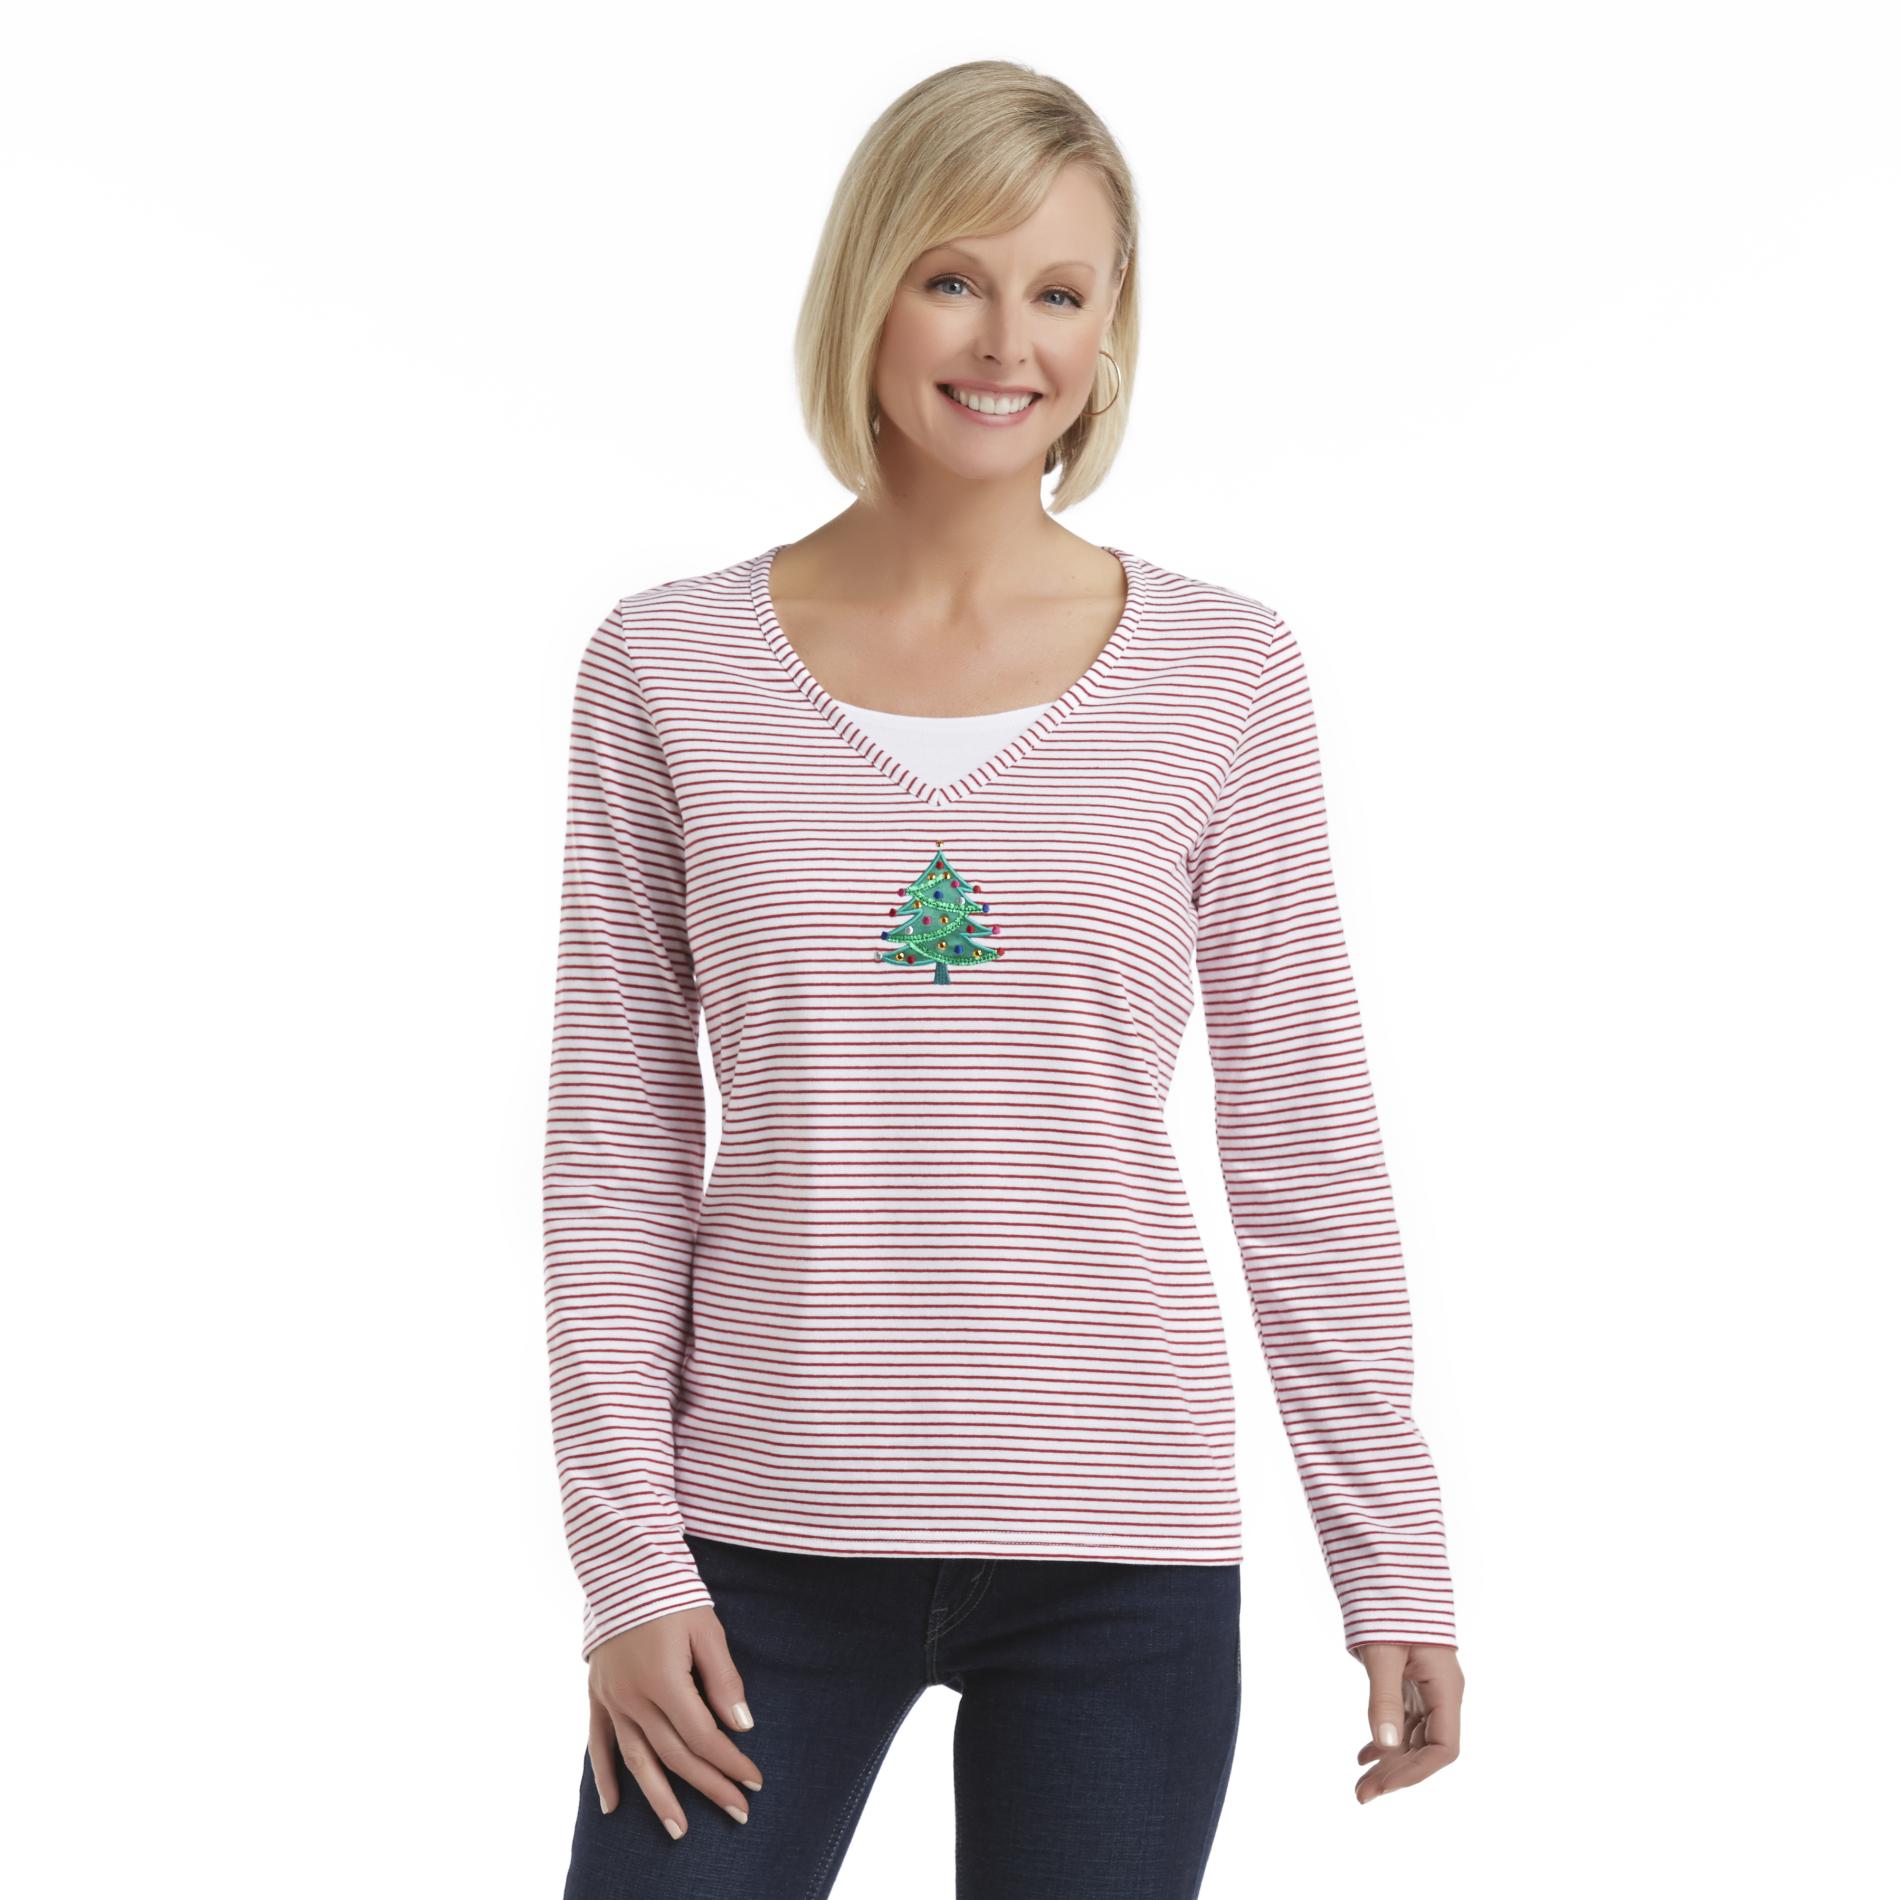 Holiday Editions Women's Layered-Look Holiday Top - Christmas Tree